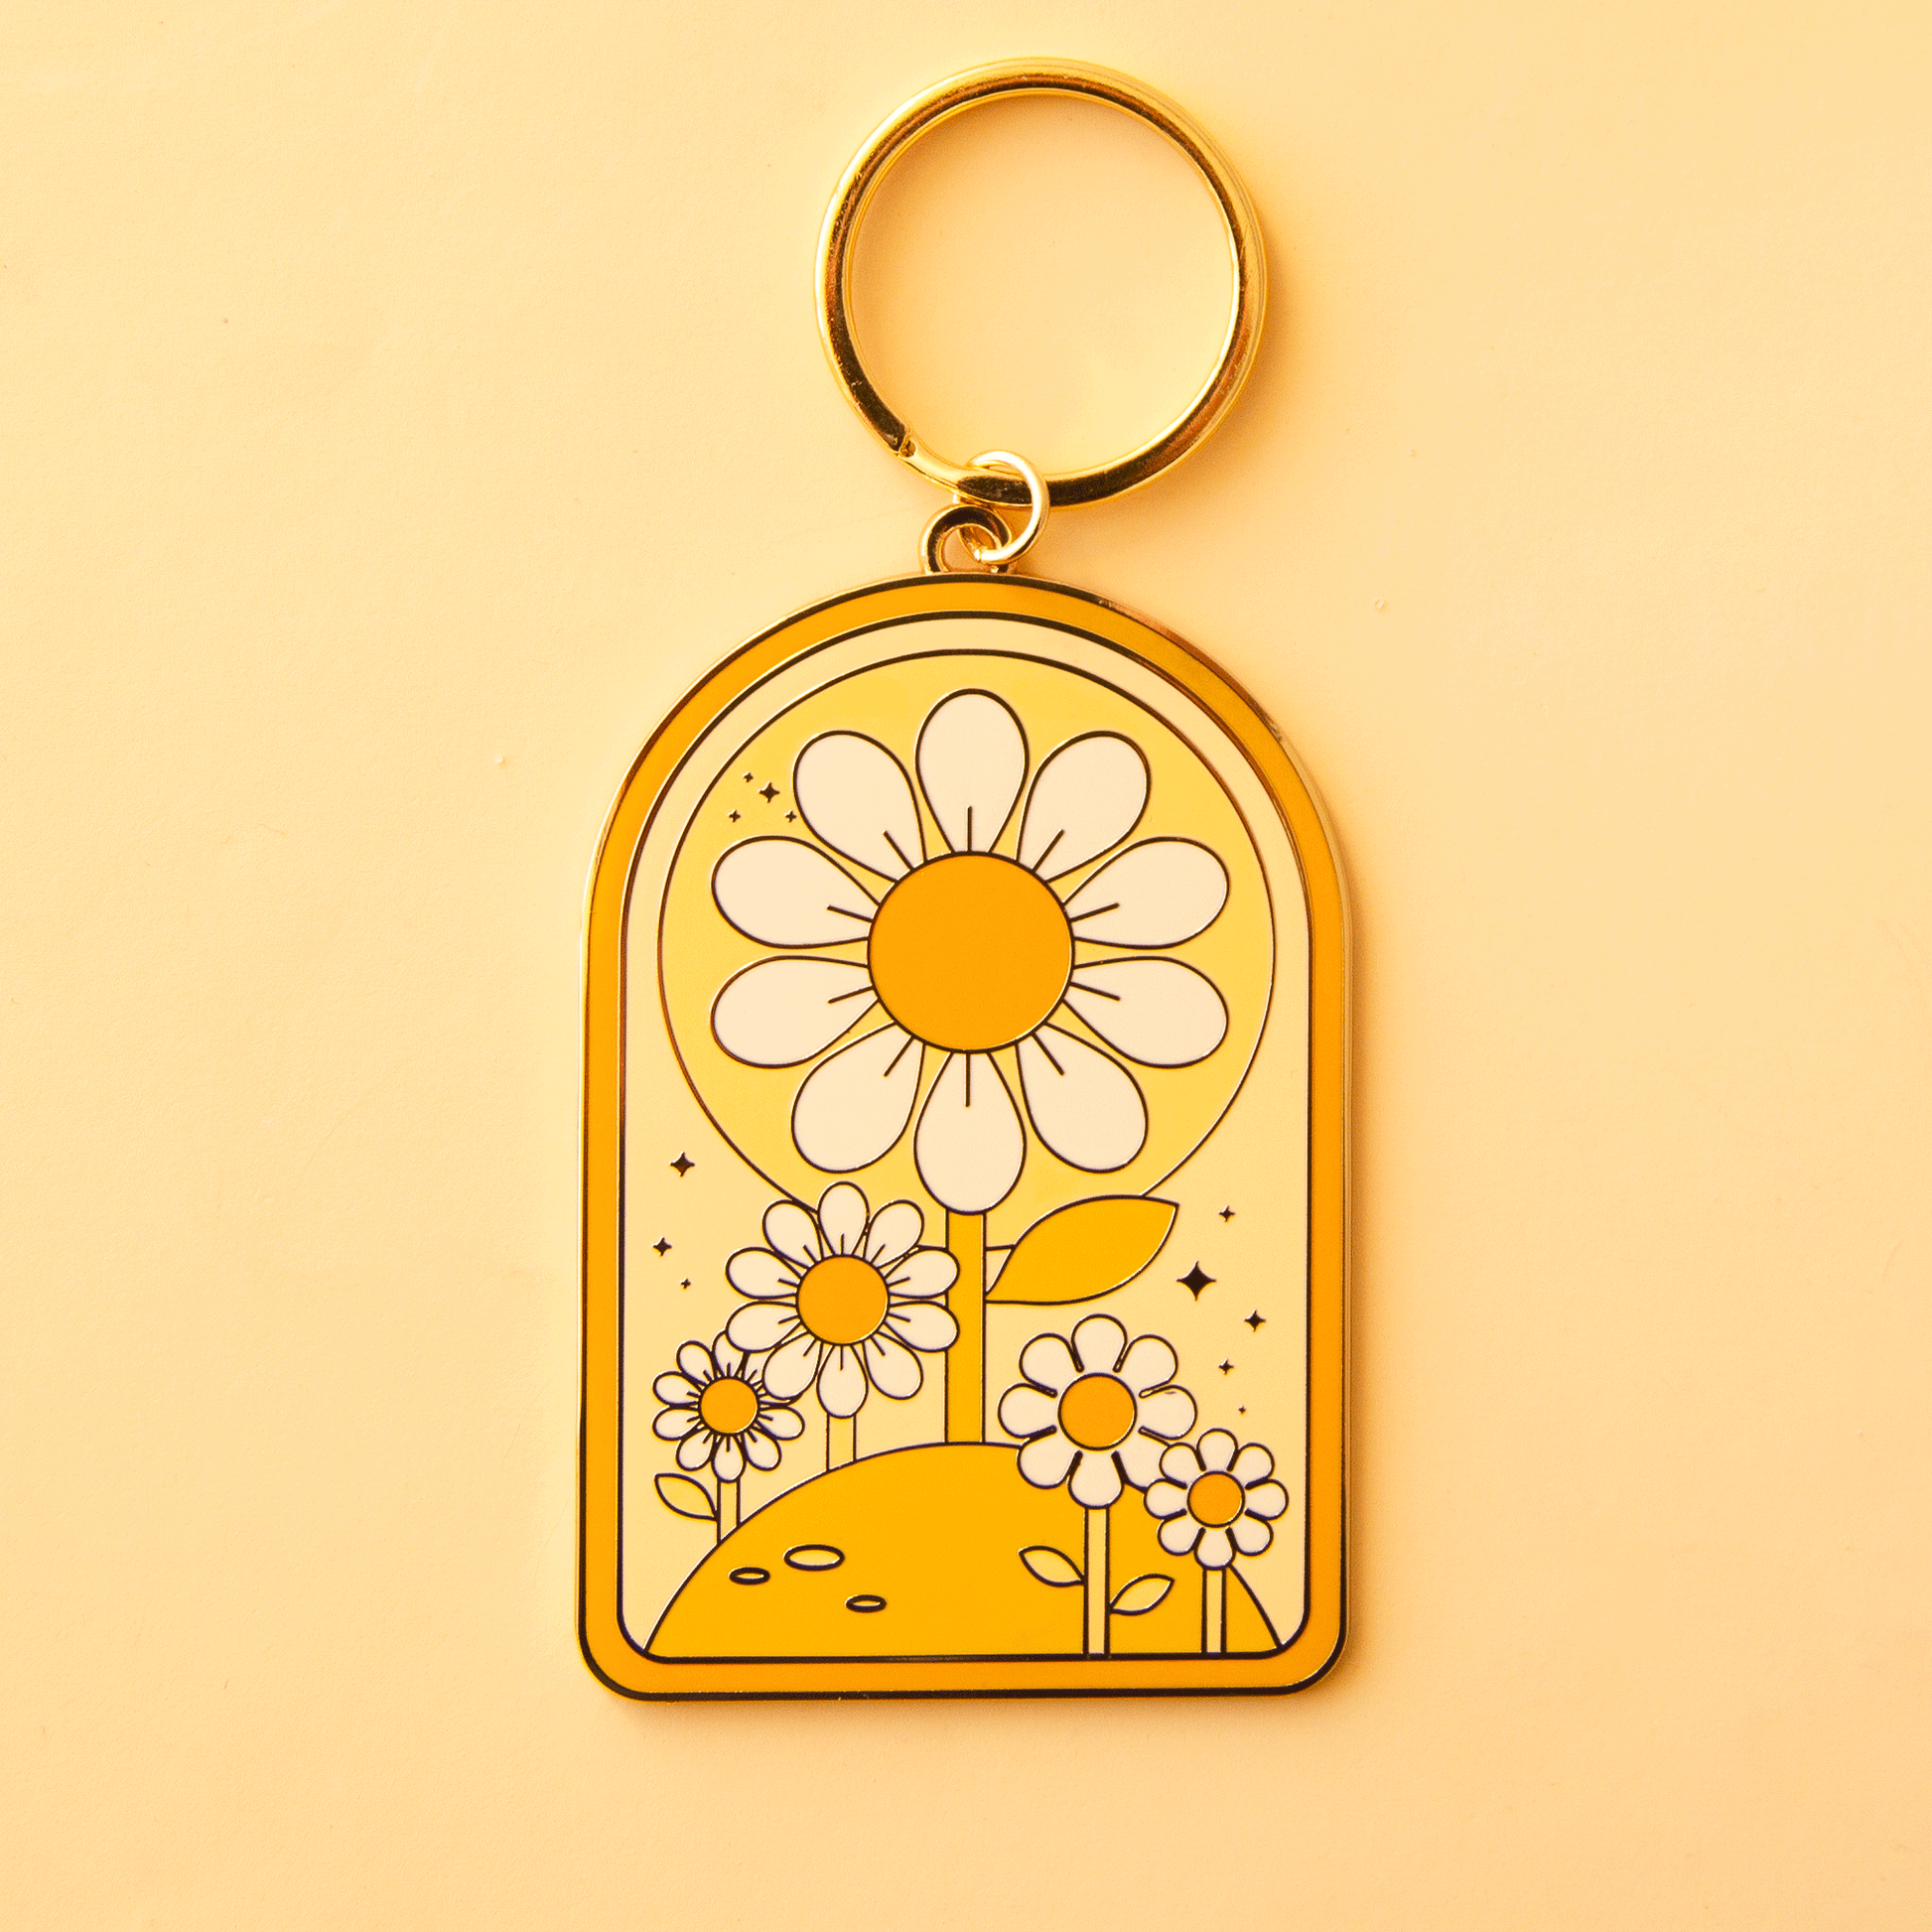 On a yellow background is an arched keychain with a gold loop and a white and yellow daisy design.